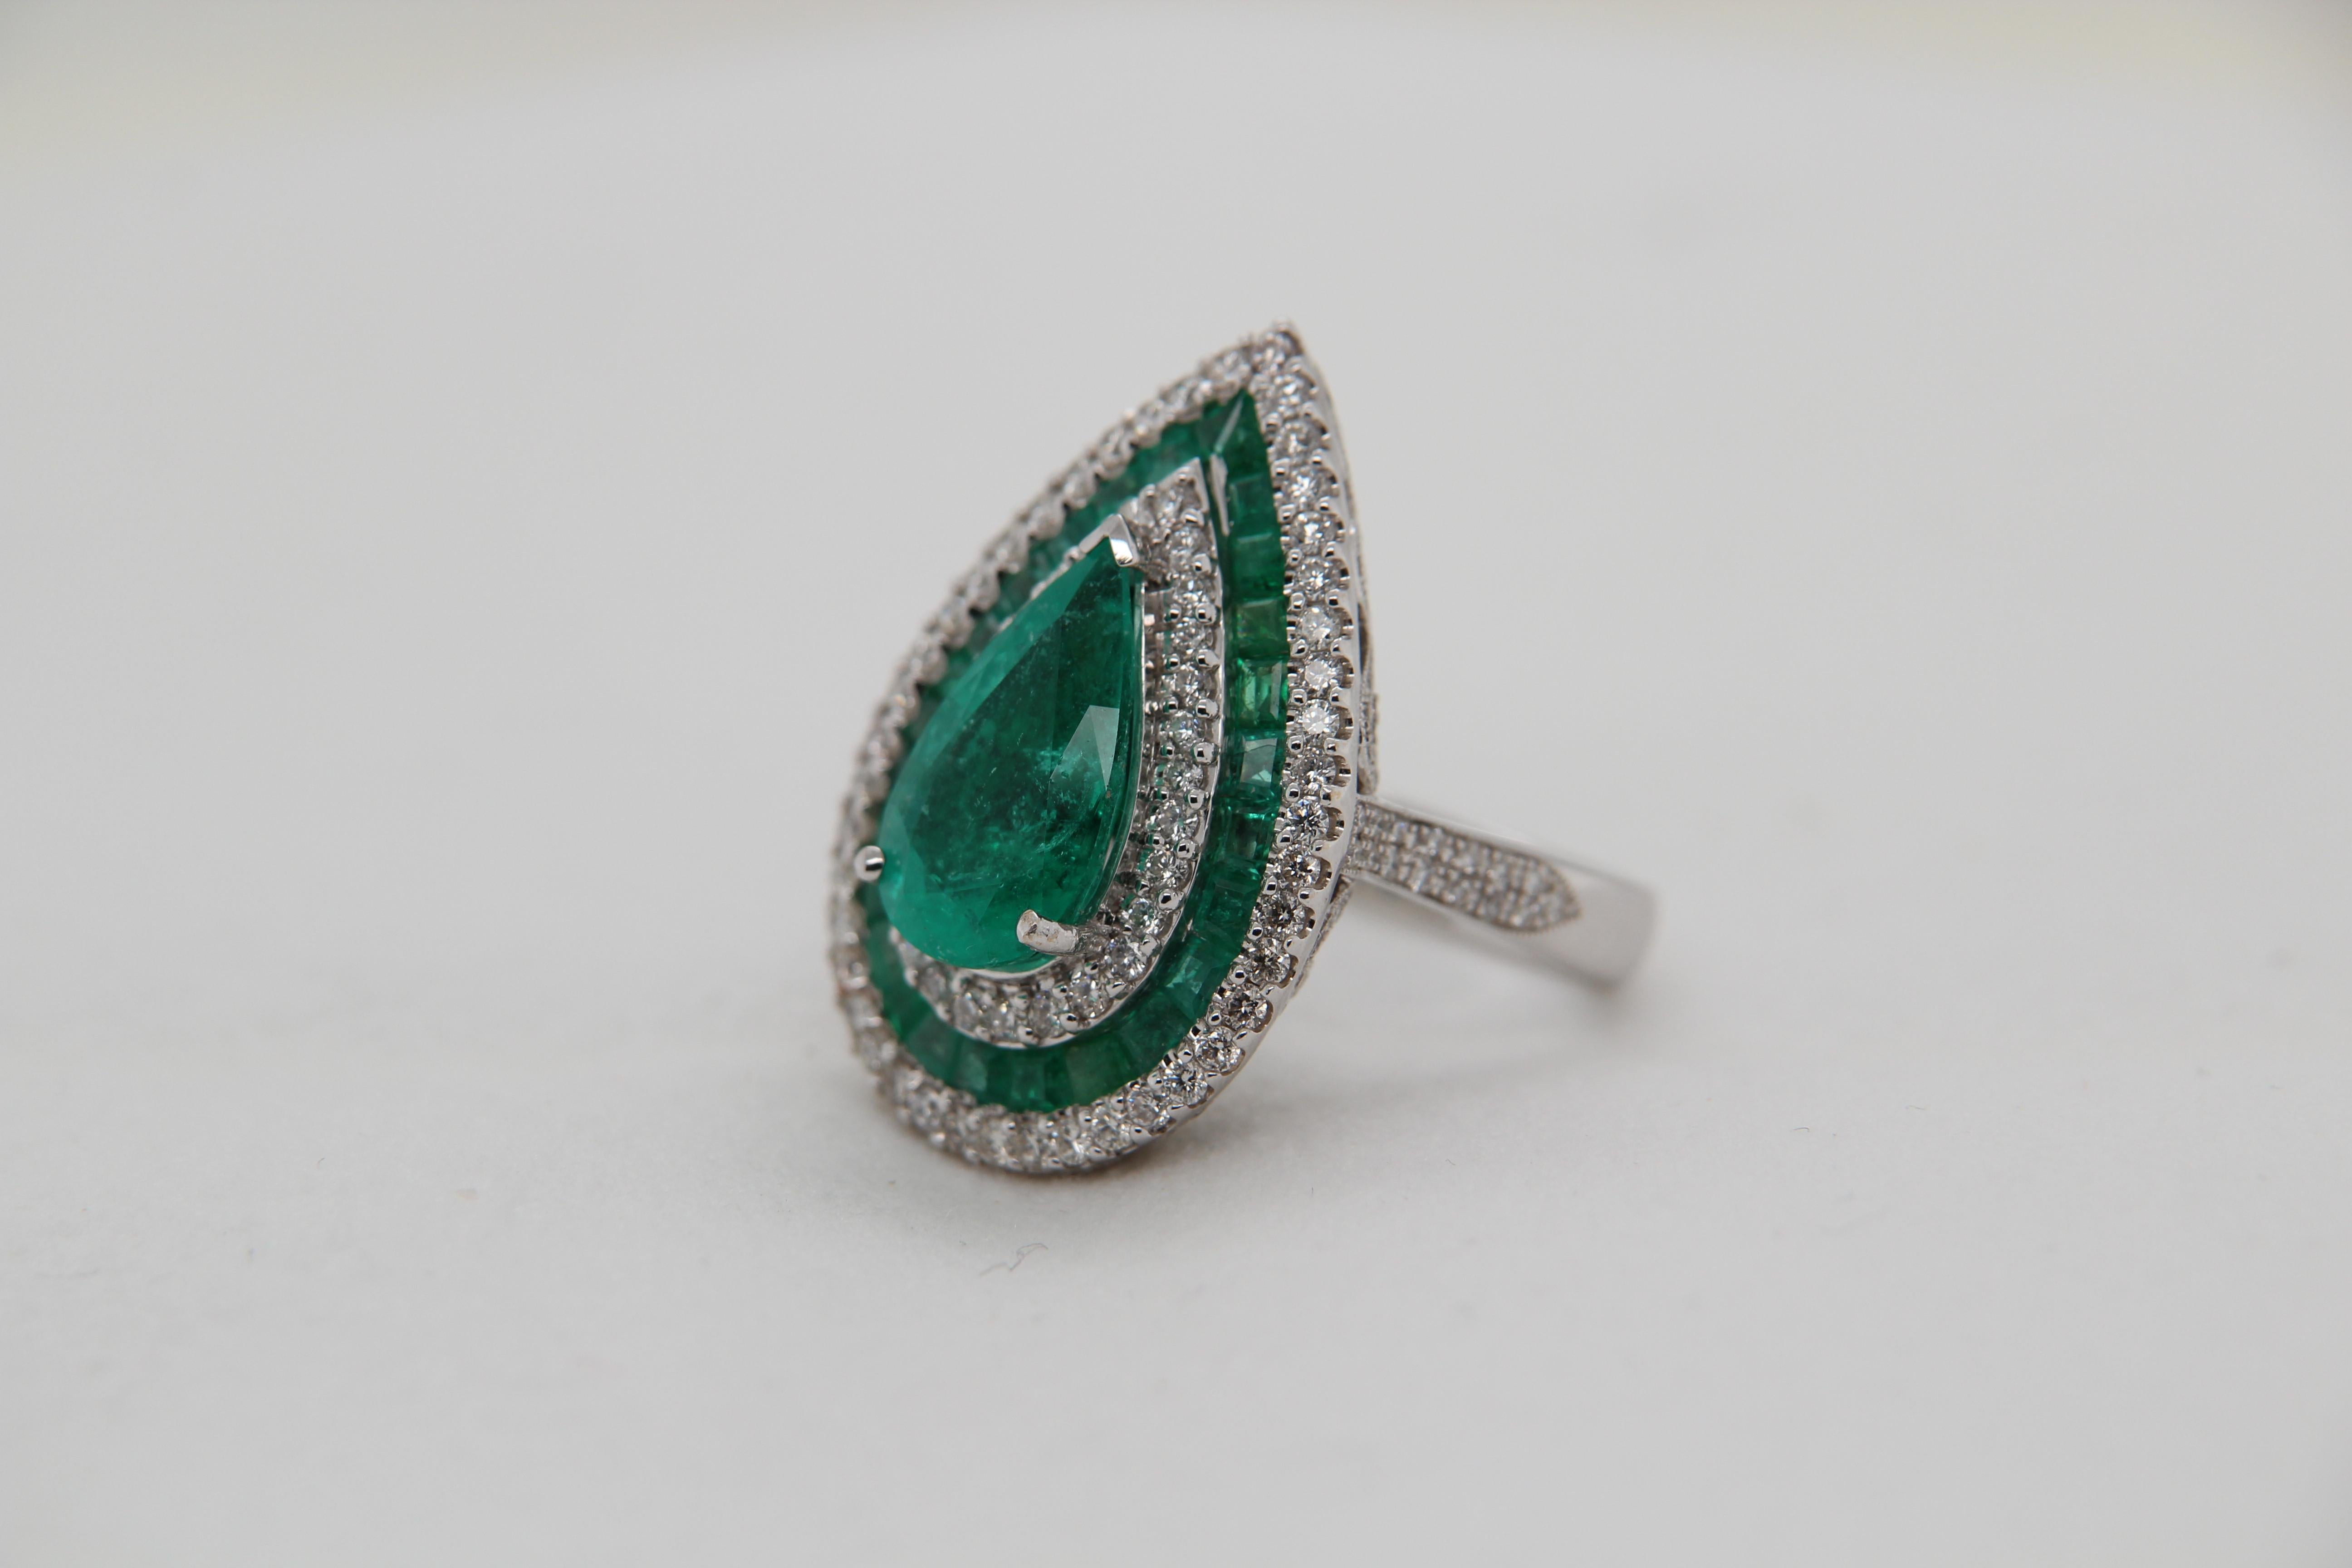 A brand new emerald cocktail ring in 18 karat gold. The centre emerald is pear shaped and weighs 3.62 carats and the supporting emeralds weigh 1.30 carats. The diamonds weigh 1.38 carats. The gross weight of the whole ring is 12.01 grams. The ring